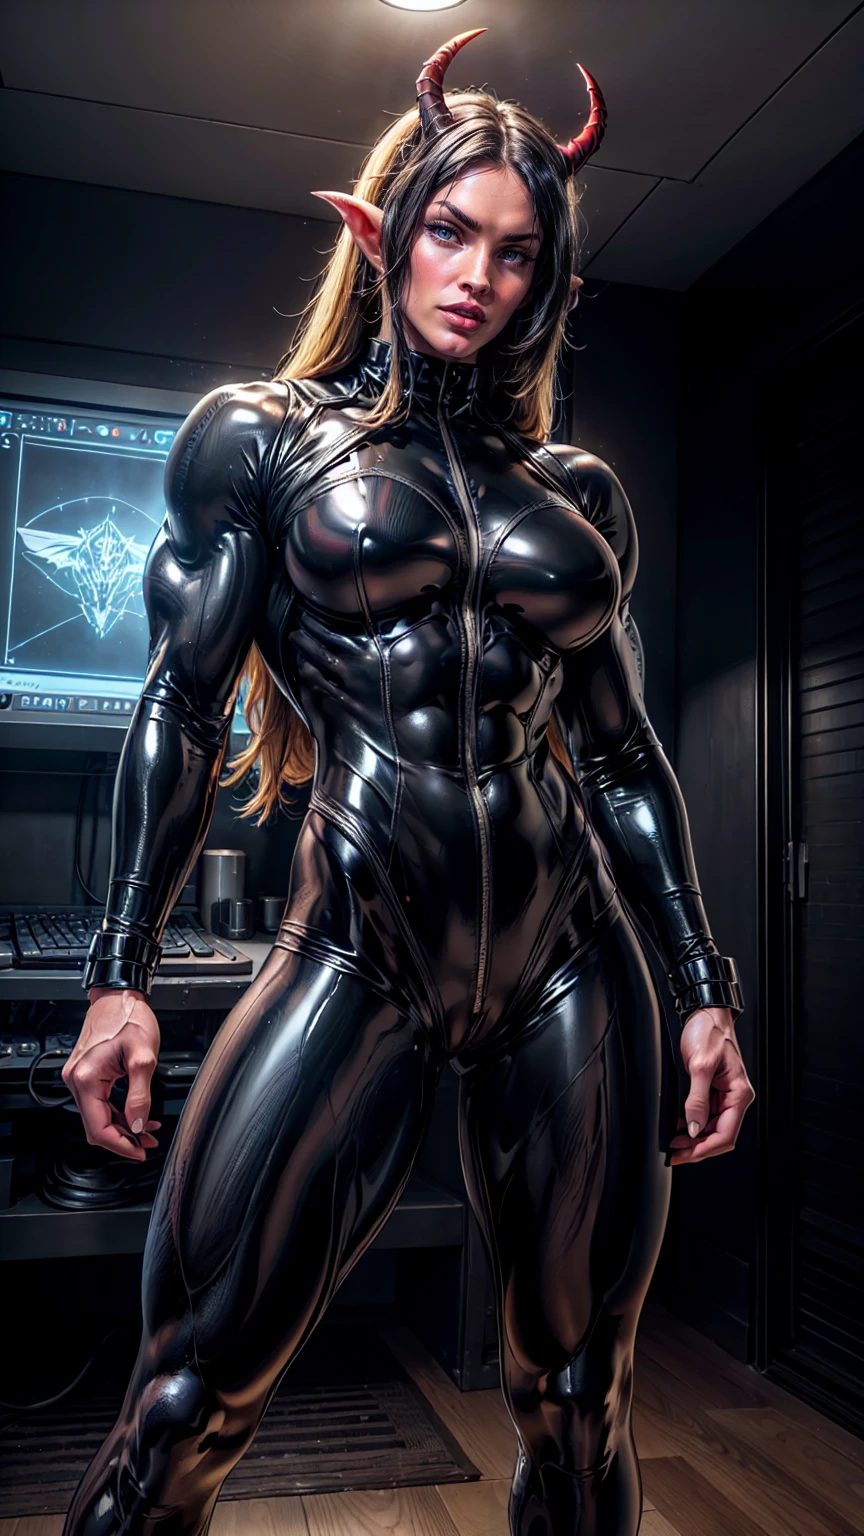 Cinematic, clear facial features and insanely detailed, the image captures the essence of (1 girl), (megan fox:1.25), (latex bodysuit:1.25), (carnage skinless muscle:1.25), (1 super muscular undead skinless succubus with gigantic horns:1.25), (exposed muscles & veins everywhere:1.25), (perfect fingers:1.25) (full body pose:1.25). The color grading is beautifully done, enhancing the overall cinematic feel. Unreal Engine makes her appearance even more mesmerizing. With depth of field (DOF), every detail is focused and accentuated, drawing attention to her eyes and hair. Peak image resolution utilizing super-resolution technology ensures pixel perfection. Cinematic lighting enhances her aura, while anti-aliasing techniques like FXAA and TXAA keep the edges smooth and clean. Adding realism to the muscular bio-mecha succubus , RTX technology enables ray tracing. Additionally, SSAO (Screen Space Ambient Occlusion) gives depth and realism to the scene, the girl's presence even more convincing. In the post-processing and post-production stages, tone mapping enhances the colors, creating a captivating visual experience. The integration of CGI (Computer-Generated Imagery) and VFX (Visual Effects brings out her demonic features seamlessly . Incredible level of detail, with intricate elements meticulously crafted, the artwork hyper maximalist and hyper-realistic. Volumetric effects add depth and dimension, with unparalleled photorealism. 8k resolution rendering ensures super detailed visuals. The volumetric lighting adds a touch of magic, highlighting her beauty and aura in an otherworldly way. High Dynamic Range (HDR) tech makes the colors pop, adding richness to the overall composition. Ultimately, this artwork presents an unreal, yet stunningly real portrayal of an incredibly beautiful bio-mecha succubus girl. The sharp focus ensures that every feature is crisply defined, creating a captivating presence. (girl face:1.45)